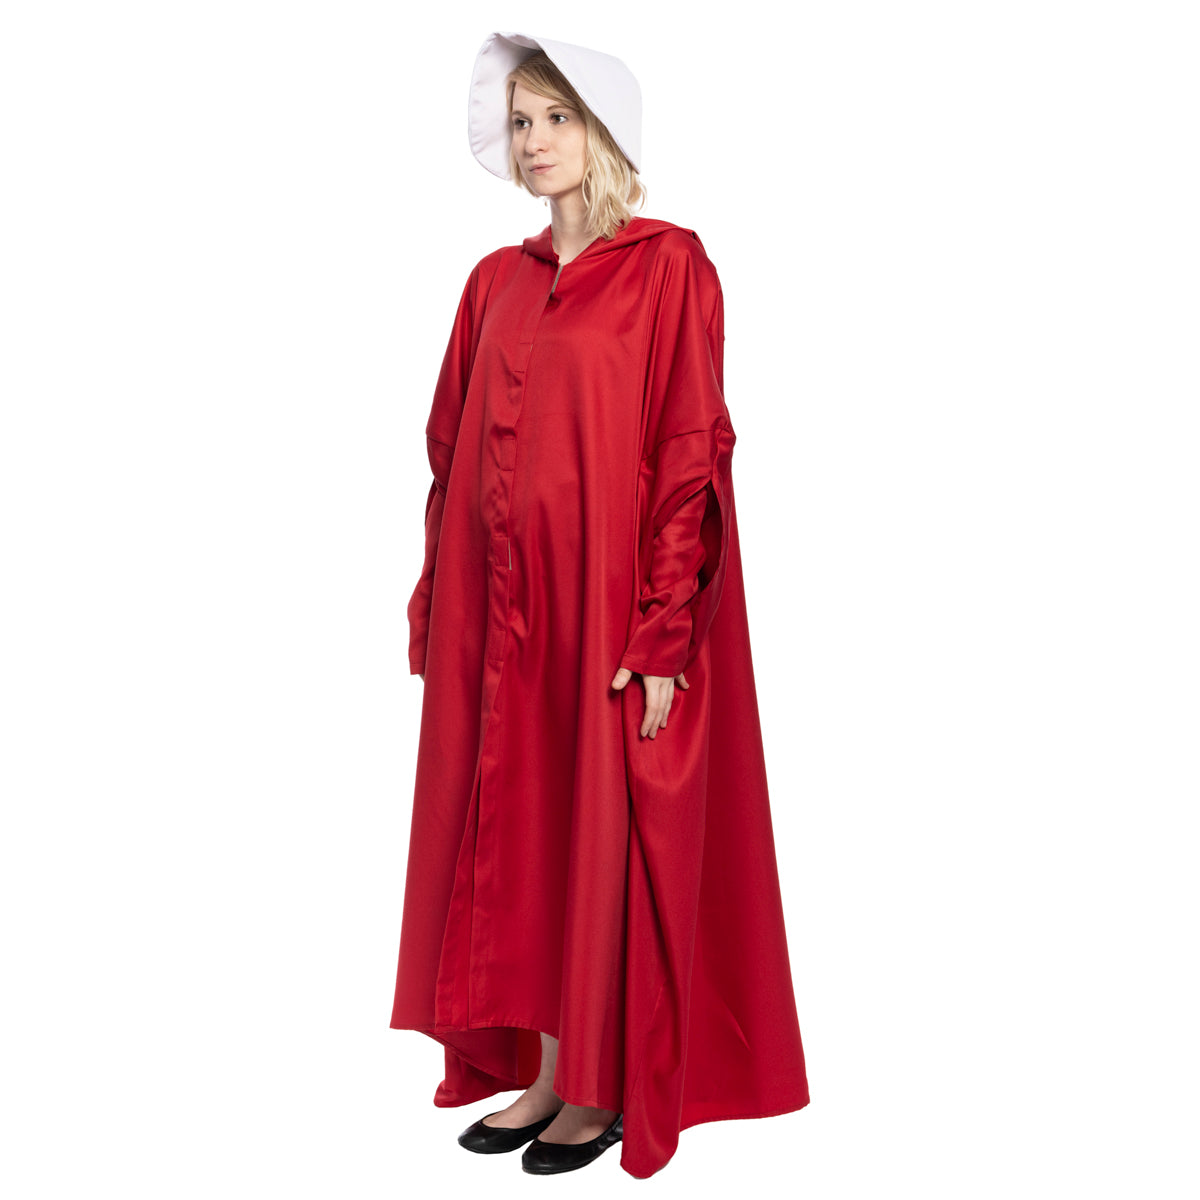 The Handmaid's Tale Red Cloak and White Hat Costume without hood